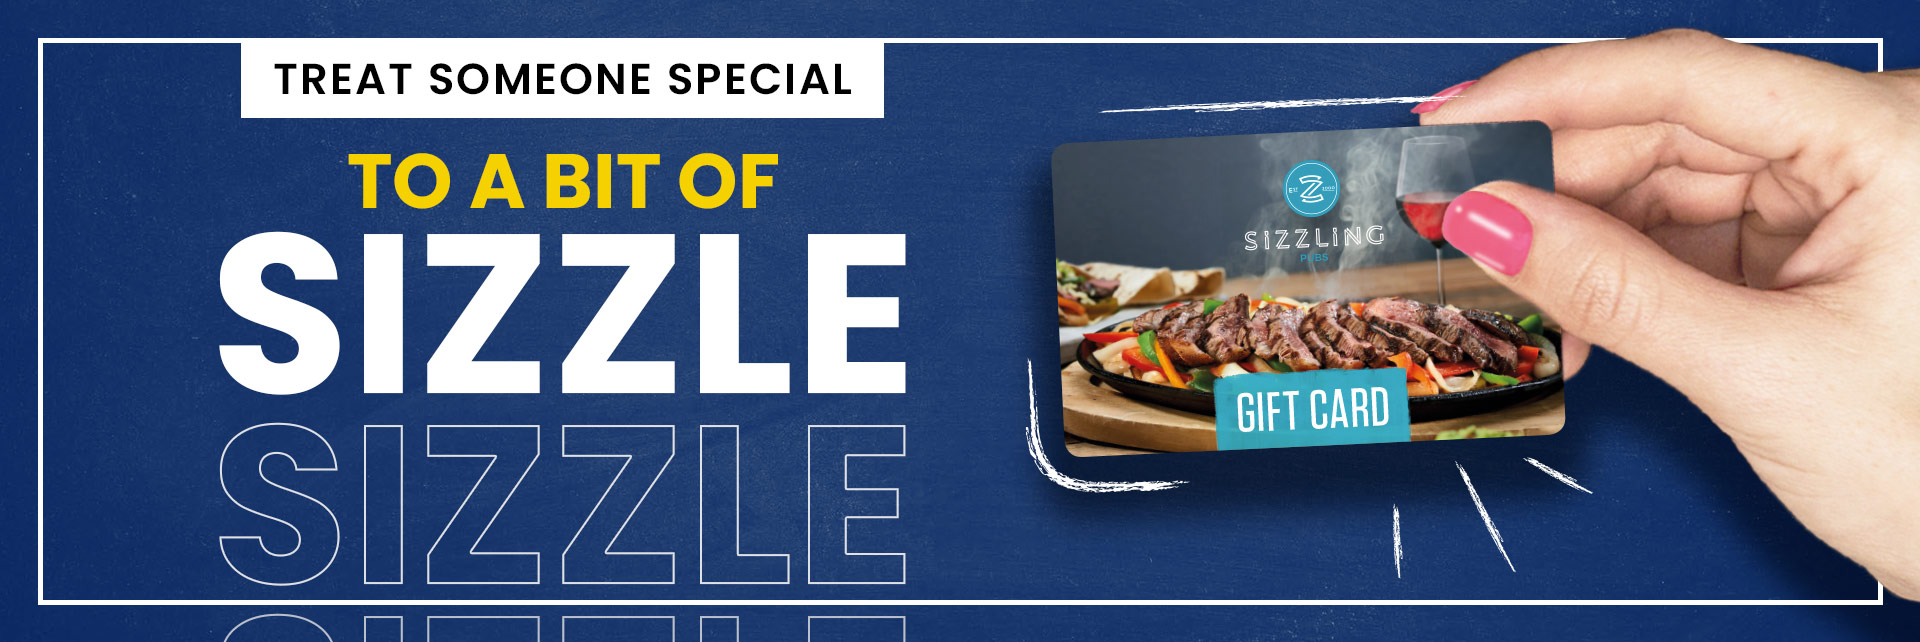 Sizzling Pubs Gift Card at The Dick Turpin in Newcastle-Under-Lyme